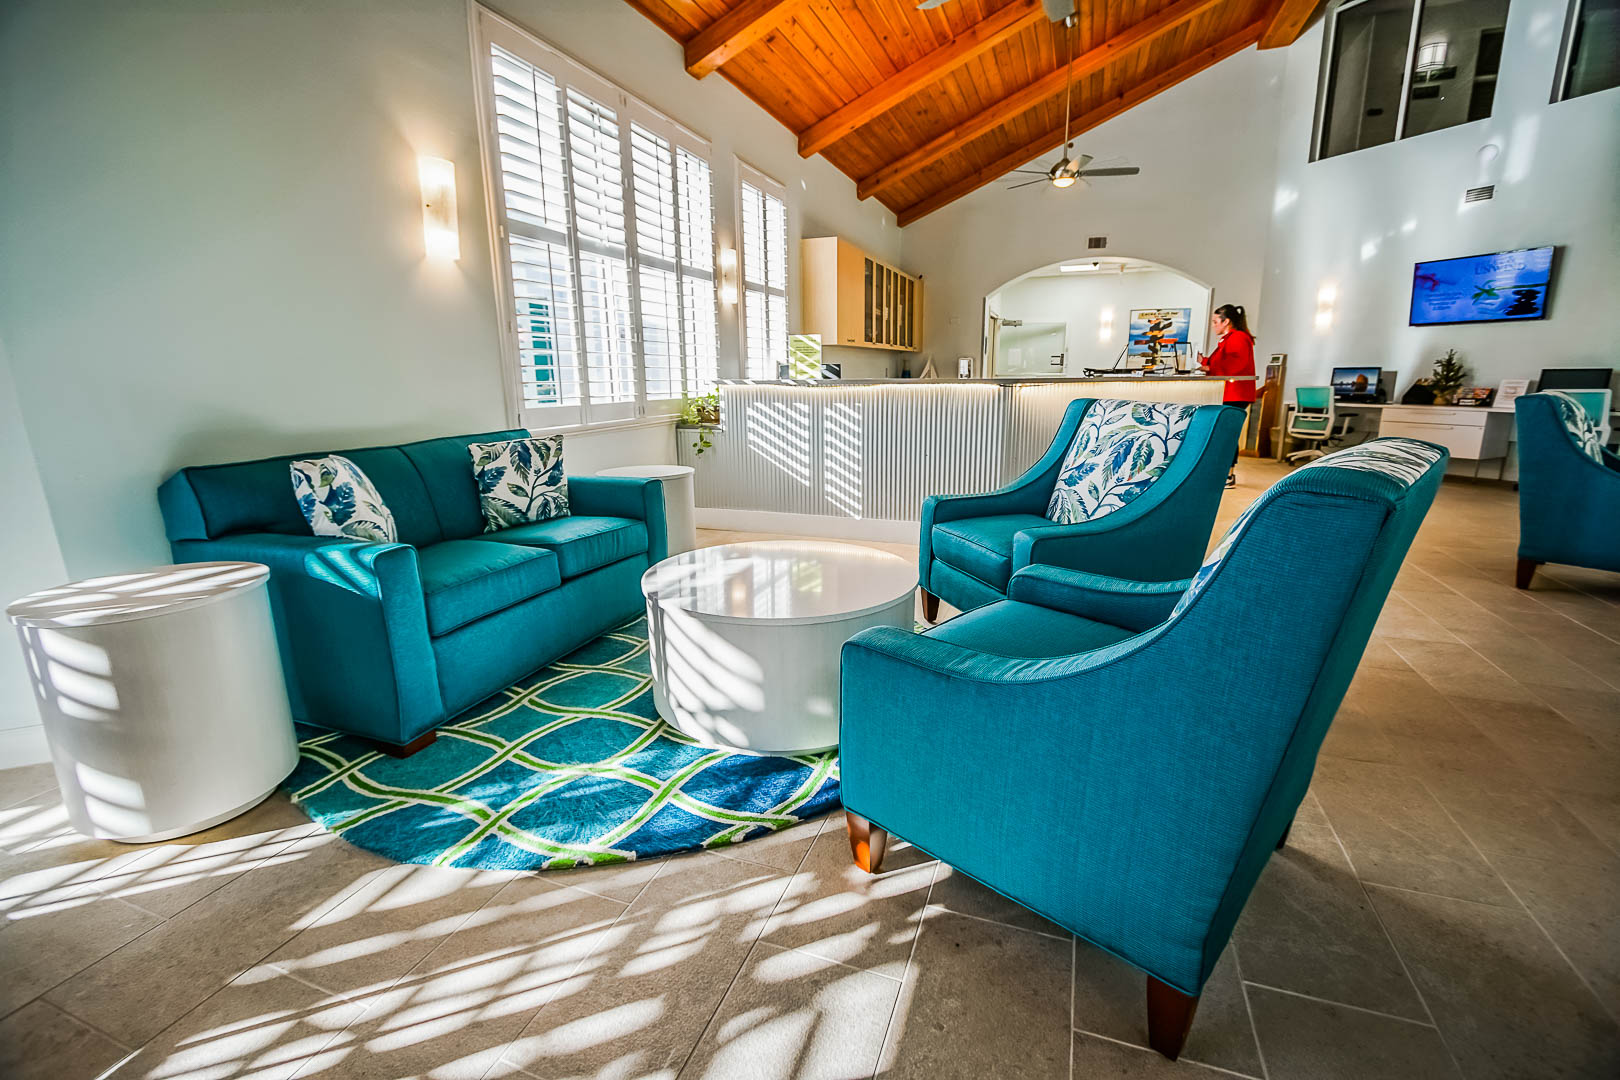 A modern and colorful resort lobby at VRI's The Resort on Cocoa Beach in Florida.